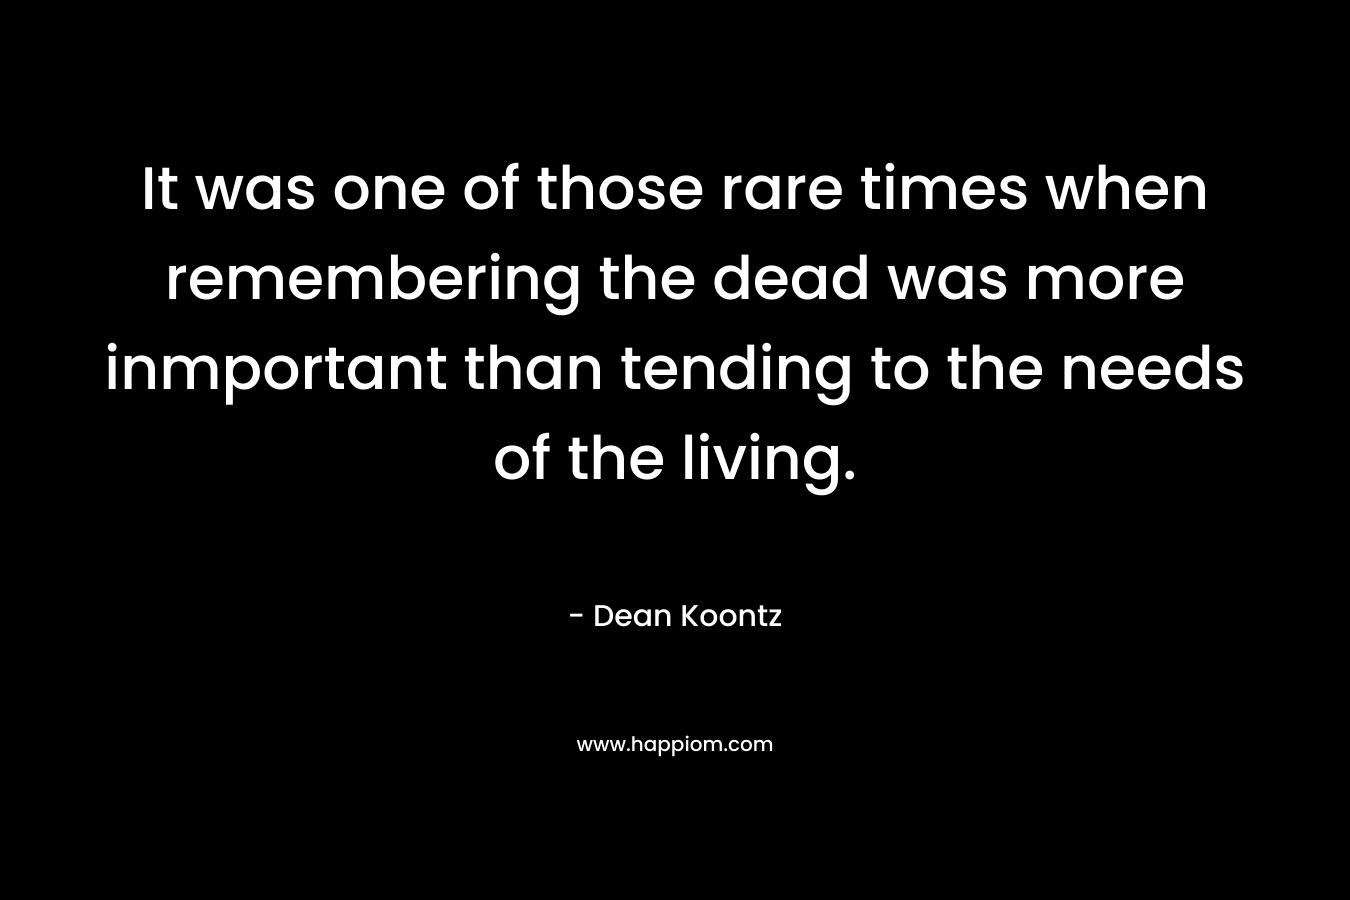 It was one of those rare times when remembering the dead was more inmportant than tending to the needs of the living.